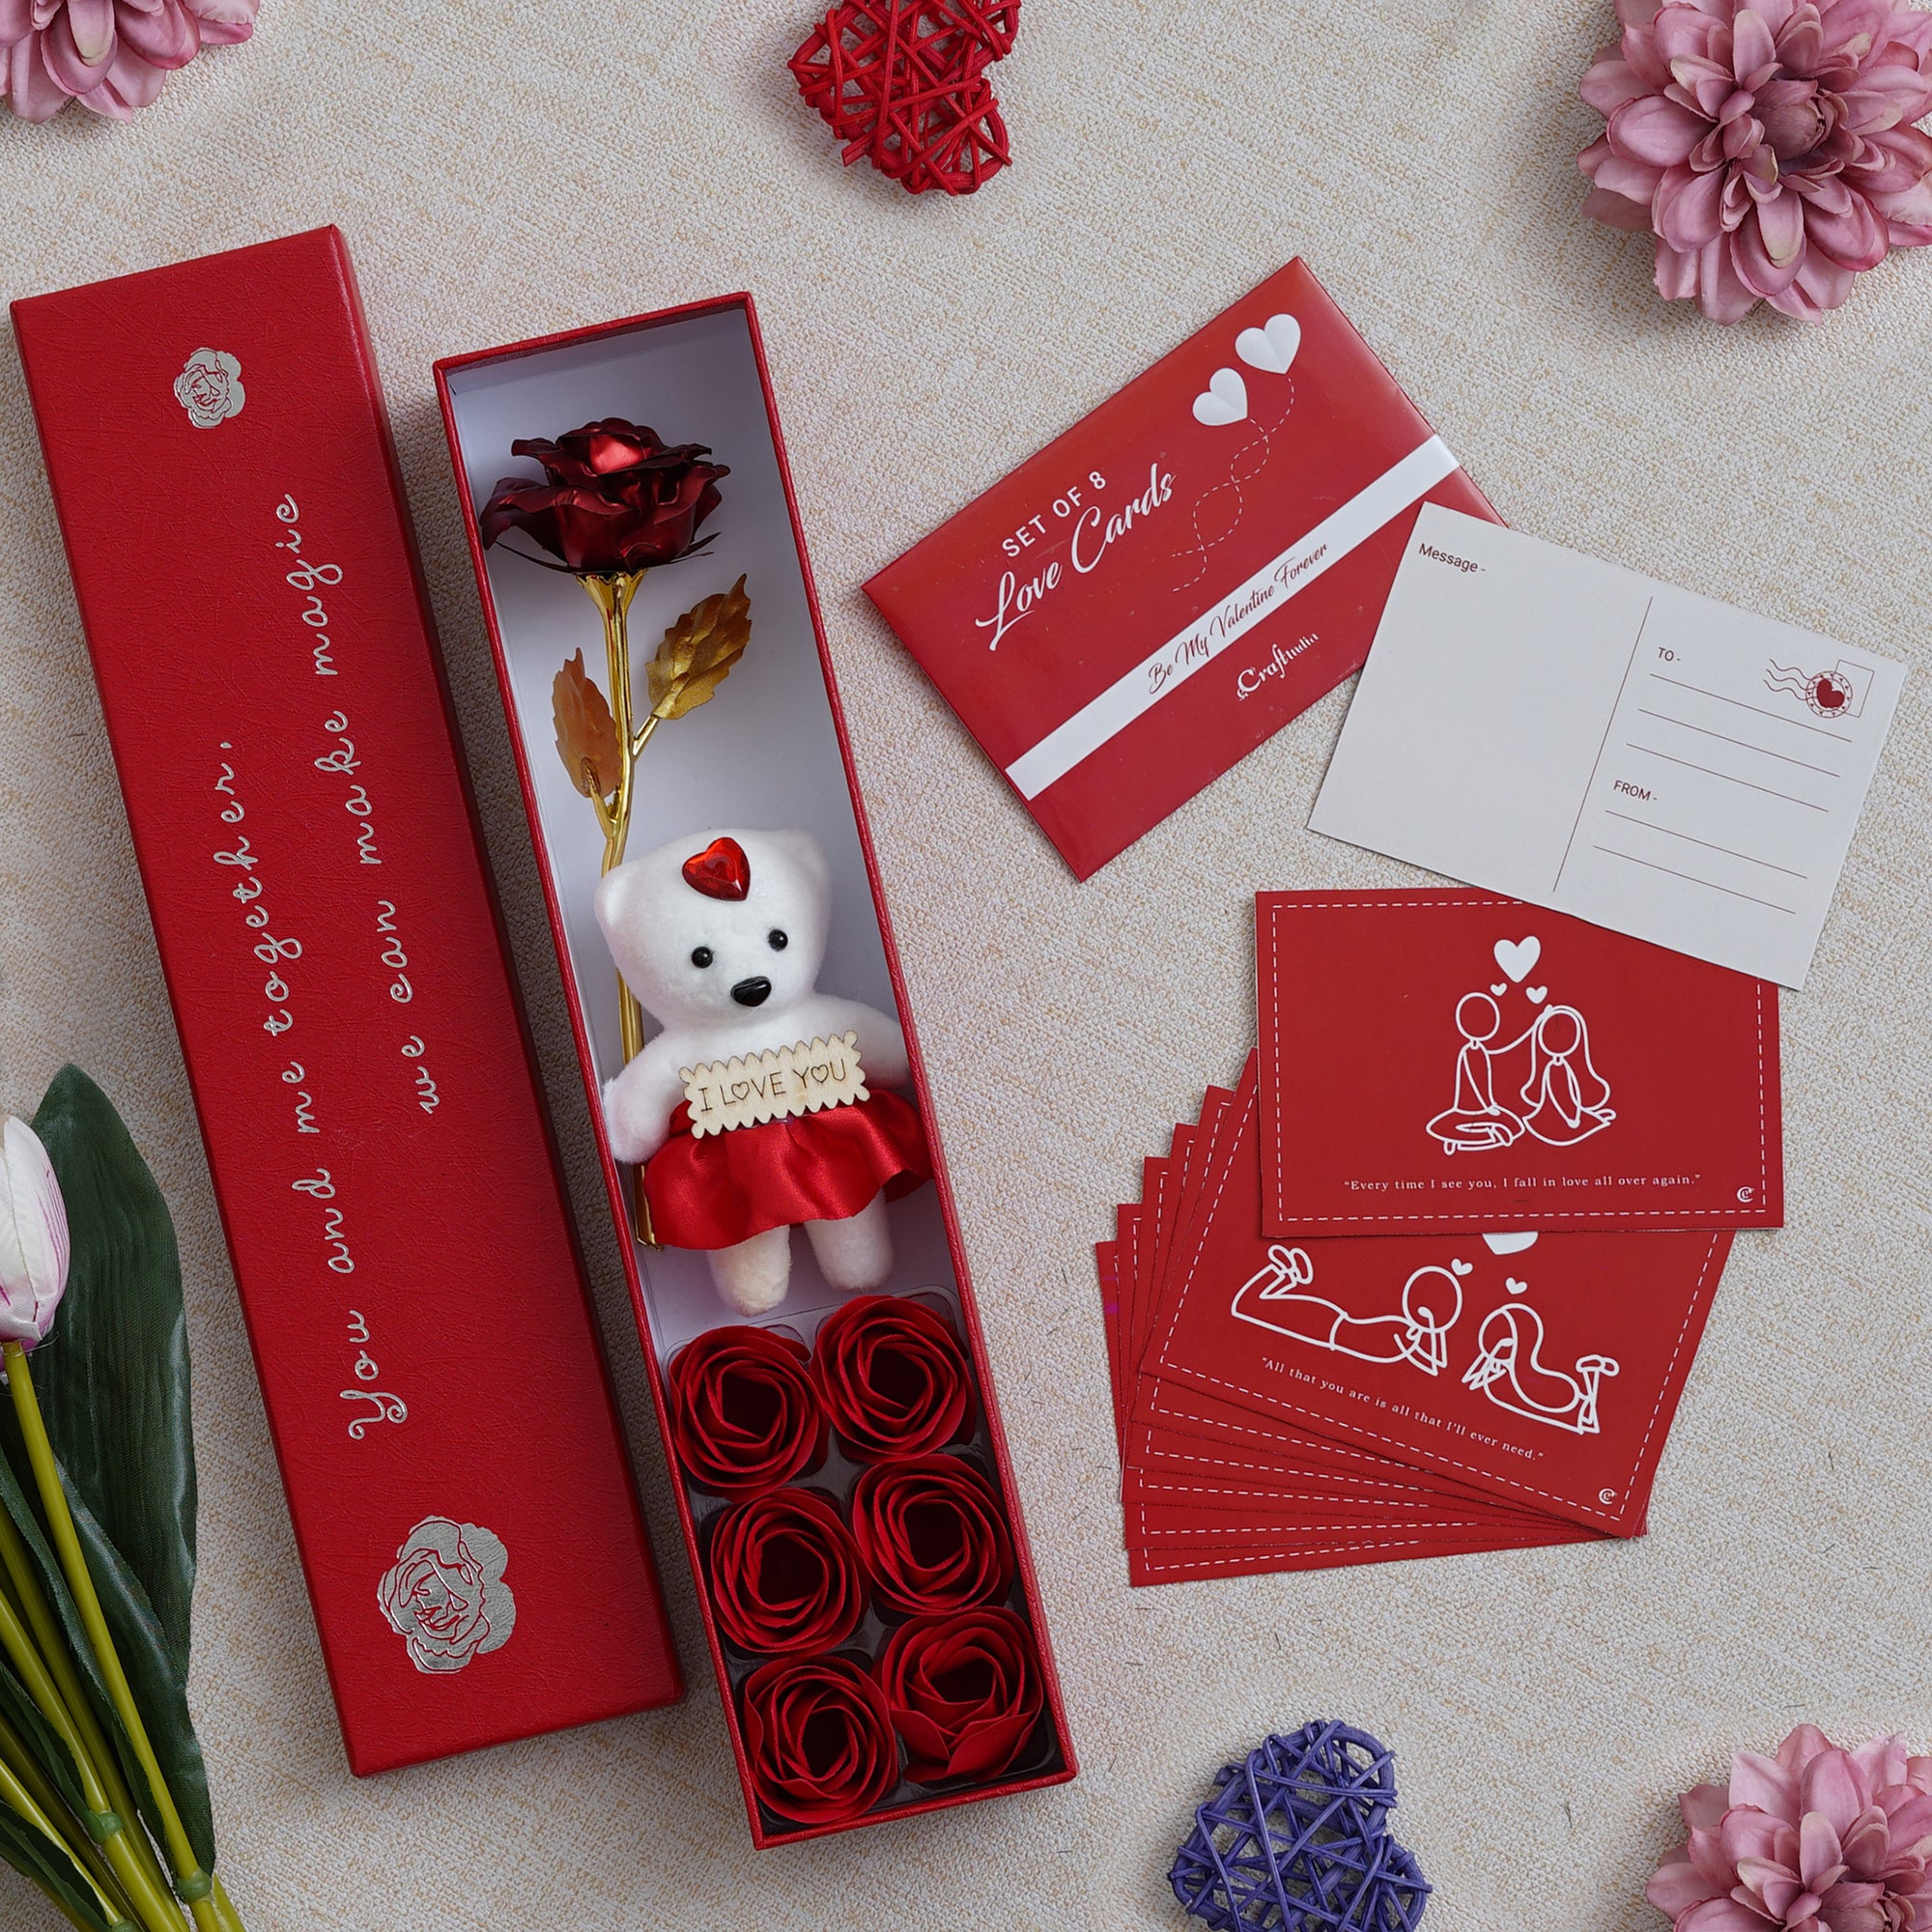 Valentine Combo of Set of 8 Love Post Cards Gift Cards Set, Red Gift Box with Teddy & Roses